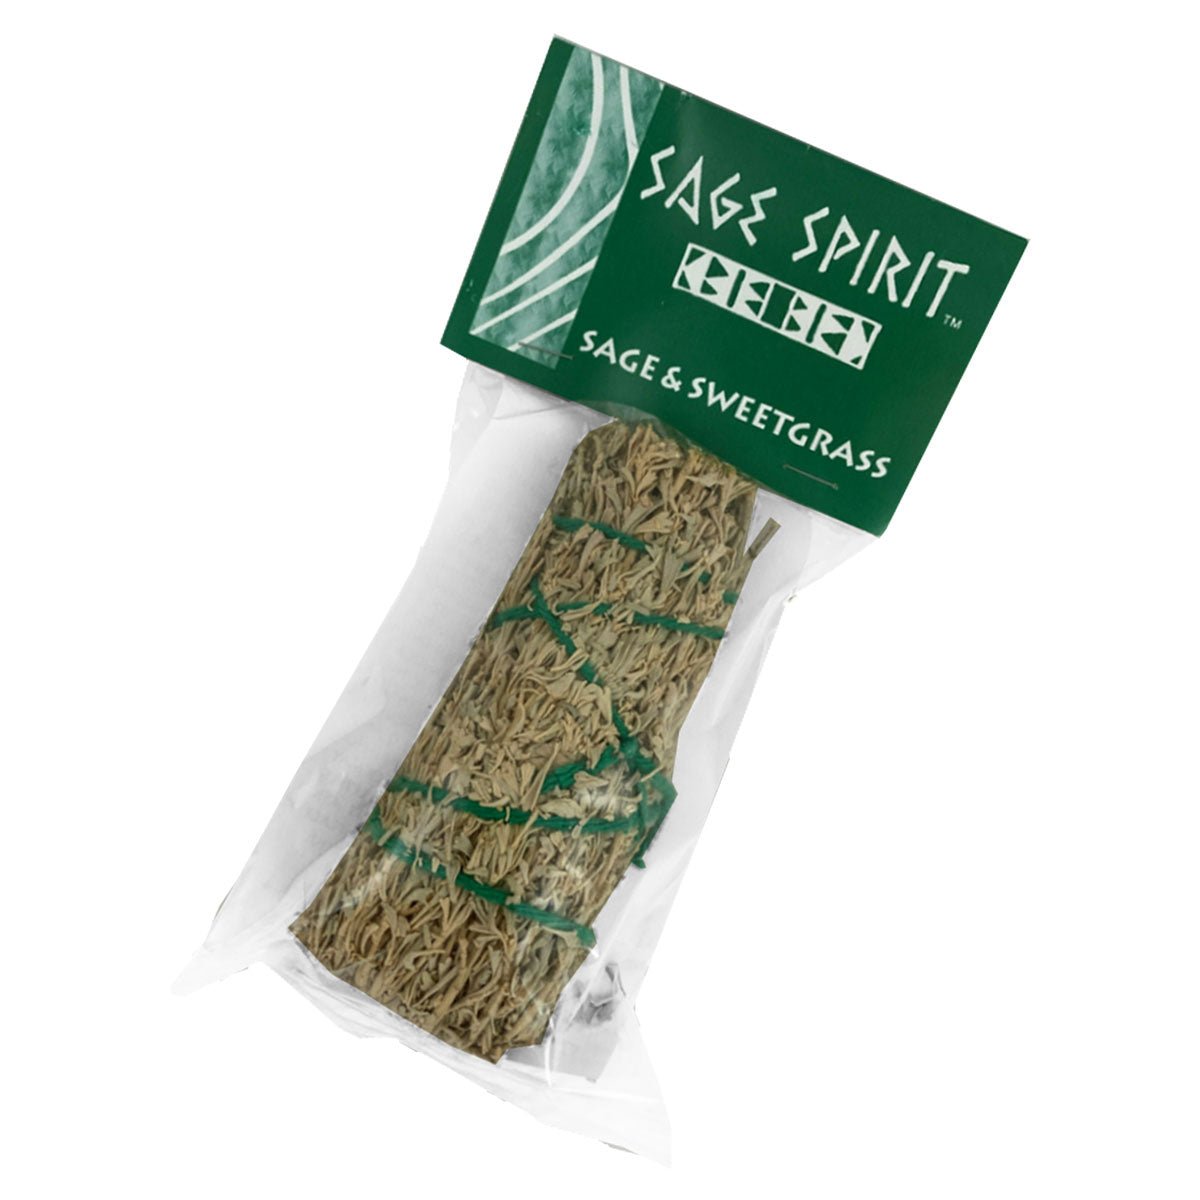 Desert Sage and Sweetgrass Smudge Stick - 13 Moons